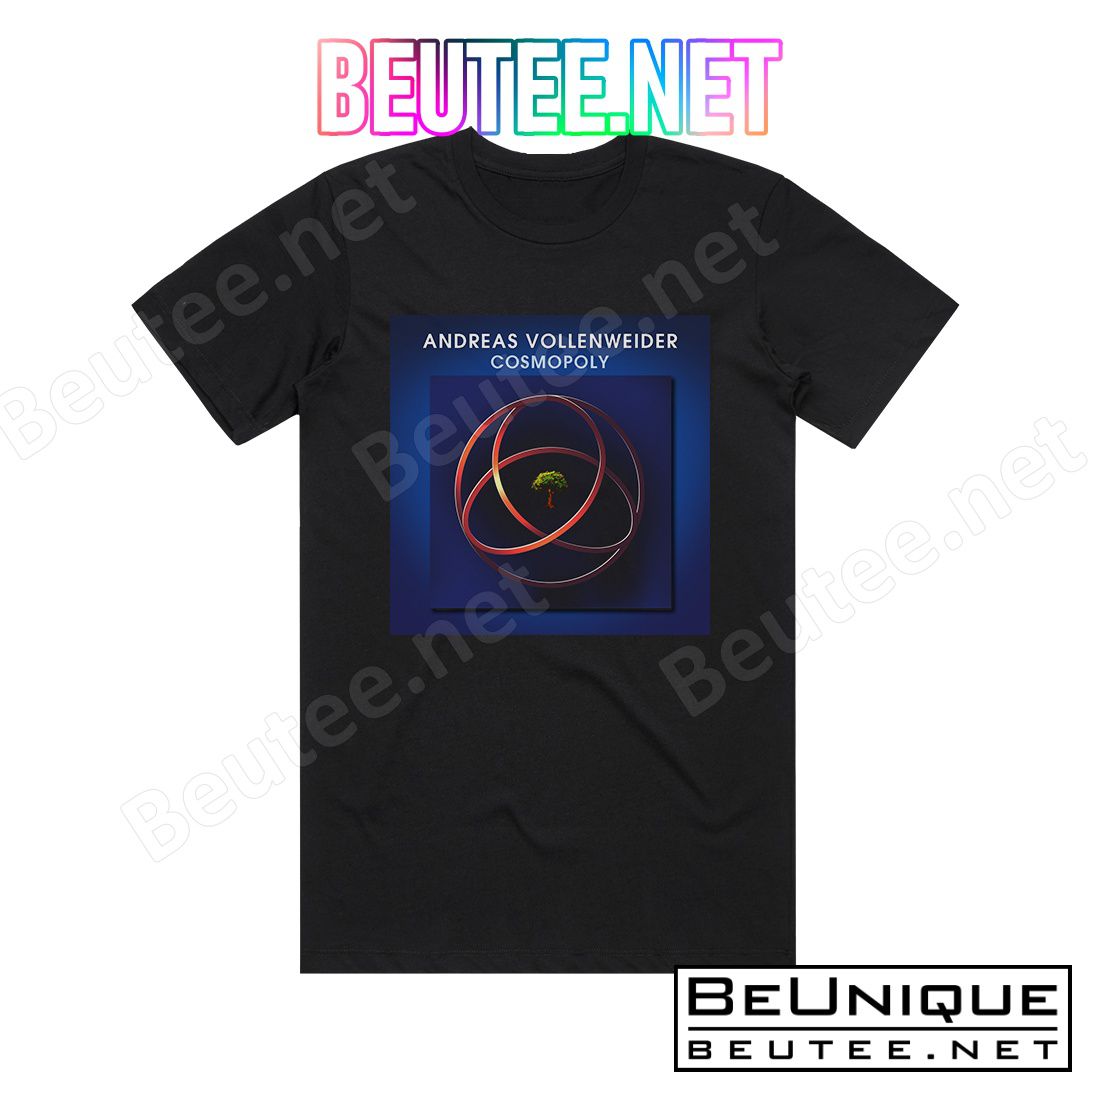 Andreas Vollenweider Cosmopoly 2 Album Cover T-Shirt